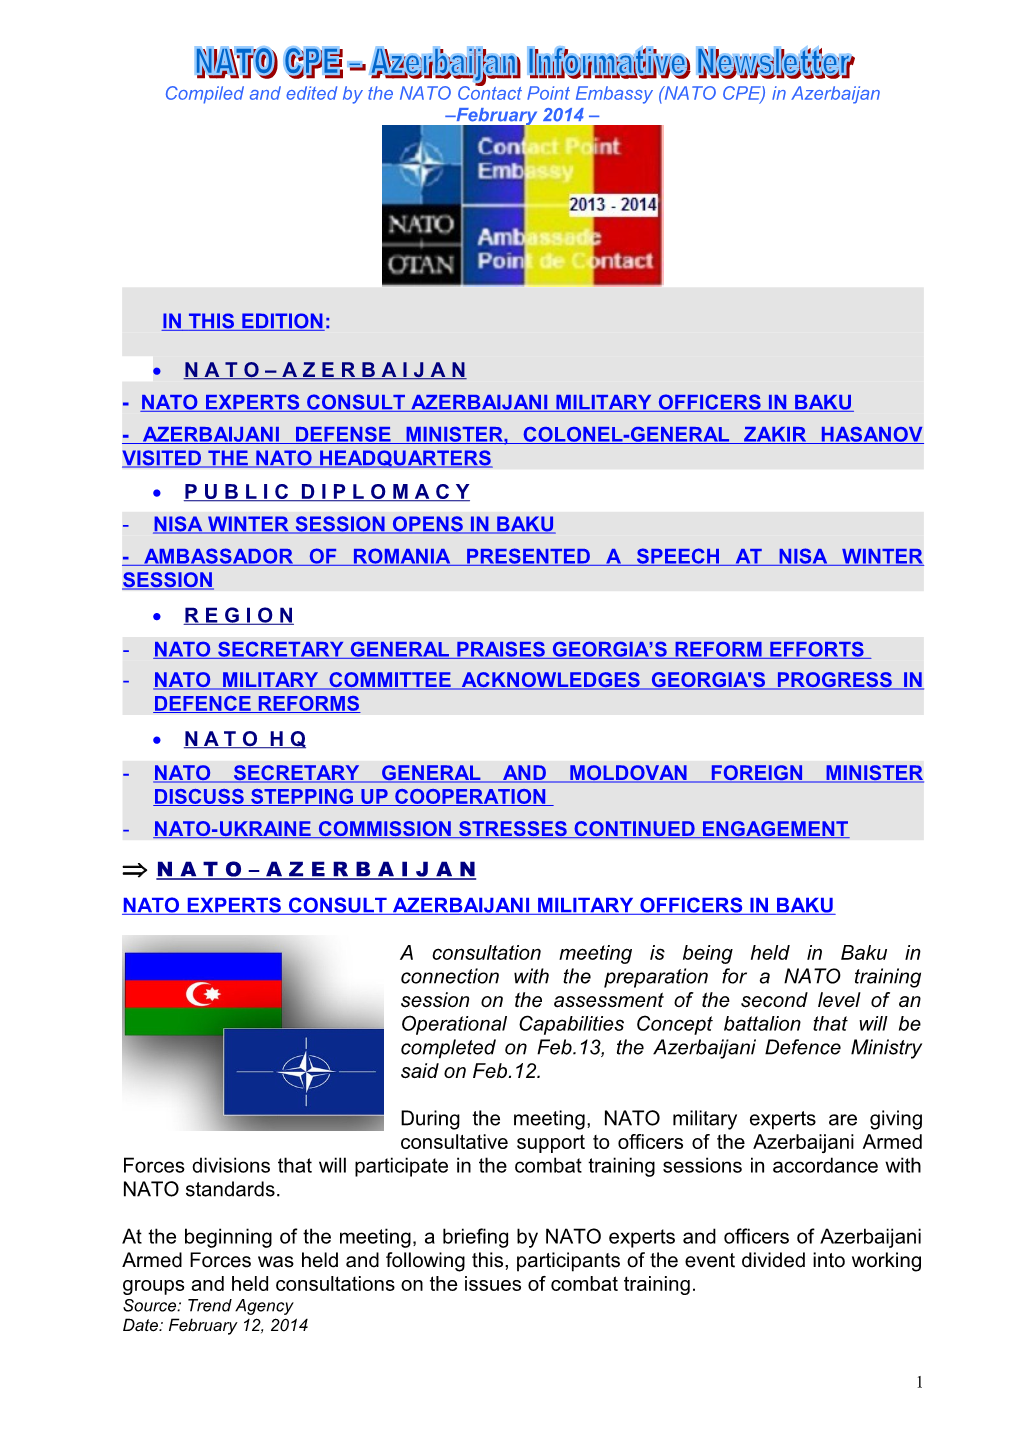 Compiled and Edited by the NATO Contact Point Embassy (NATO CPE) in Azerbaijan